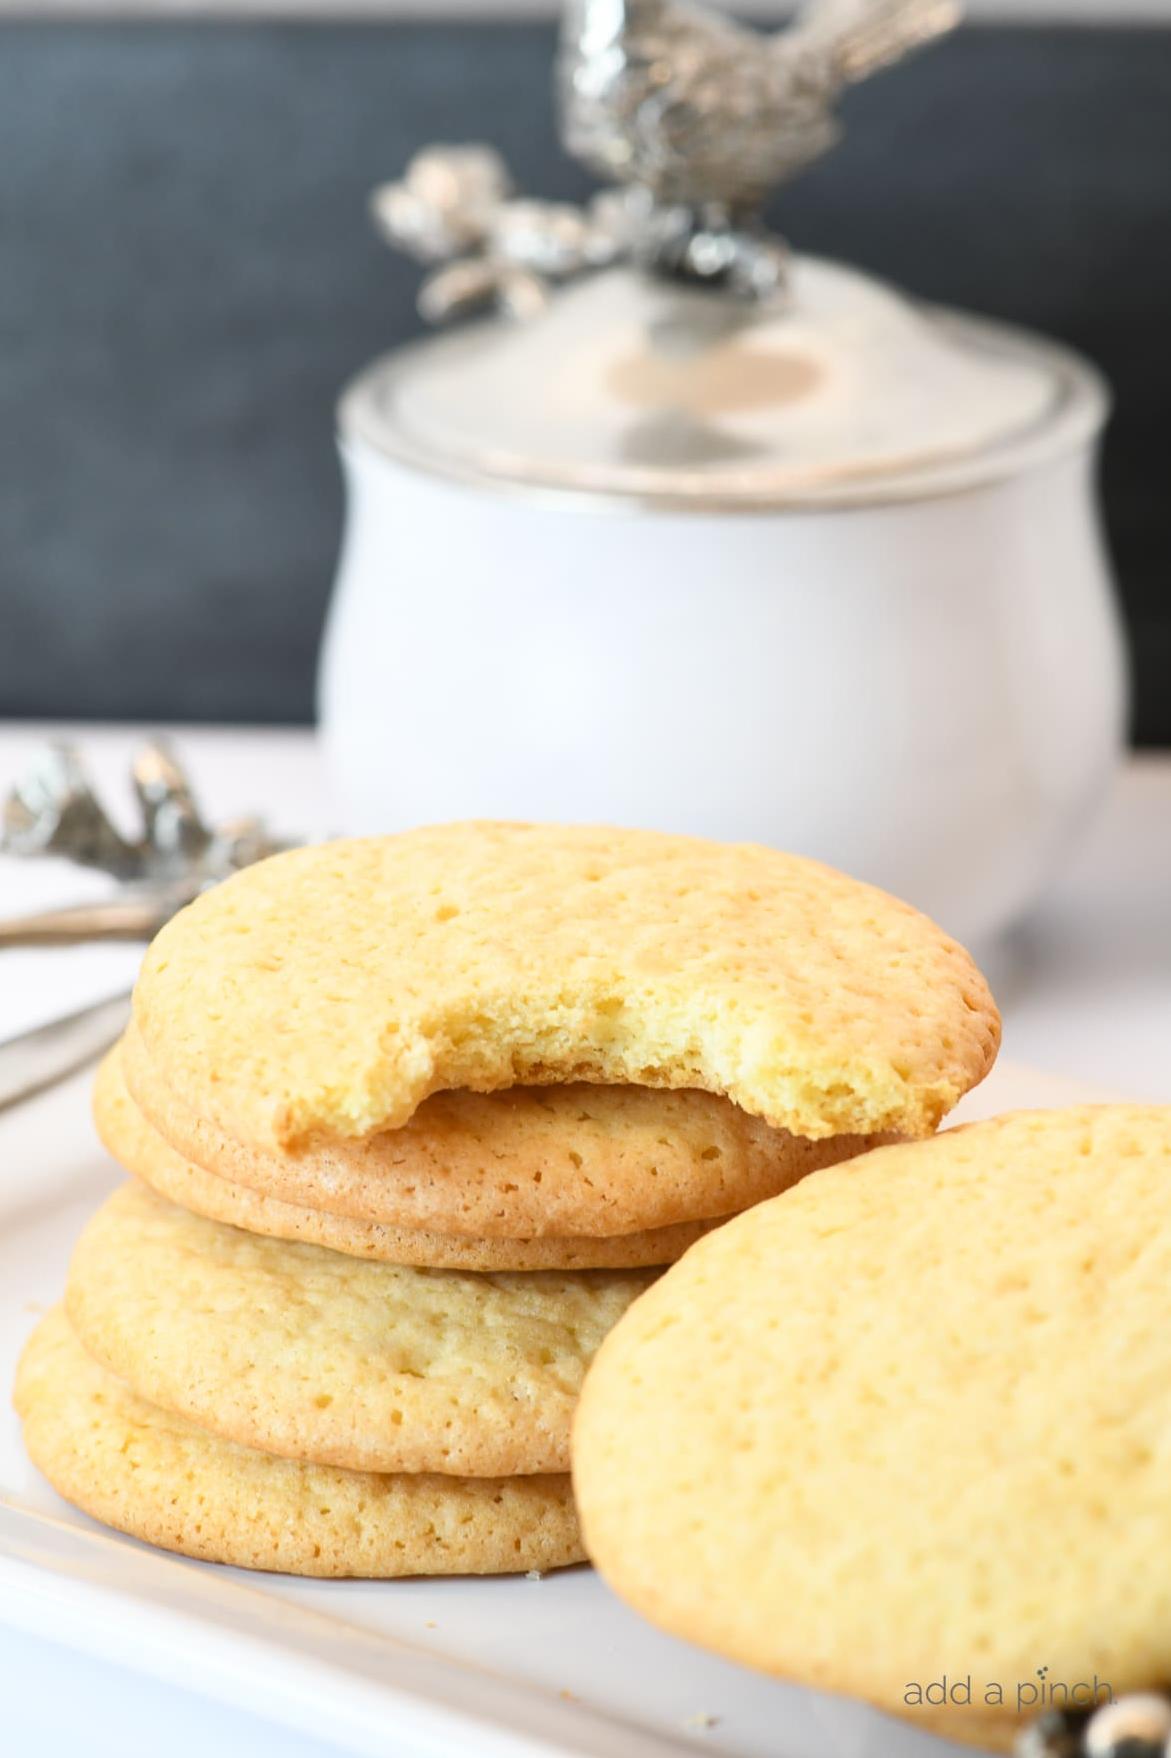  Enjoy a cozy evening in with a hot cup of tea and a plate of these deliciously crumbly cookies.